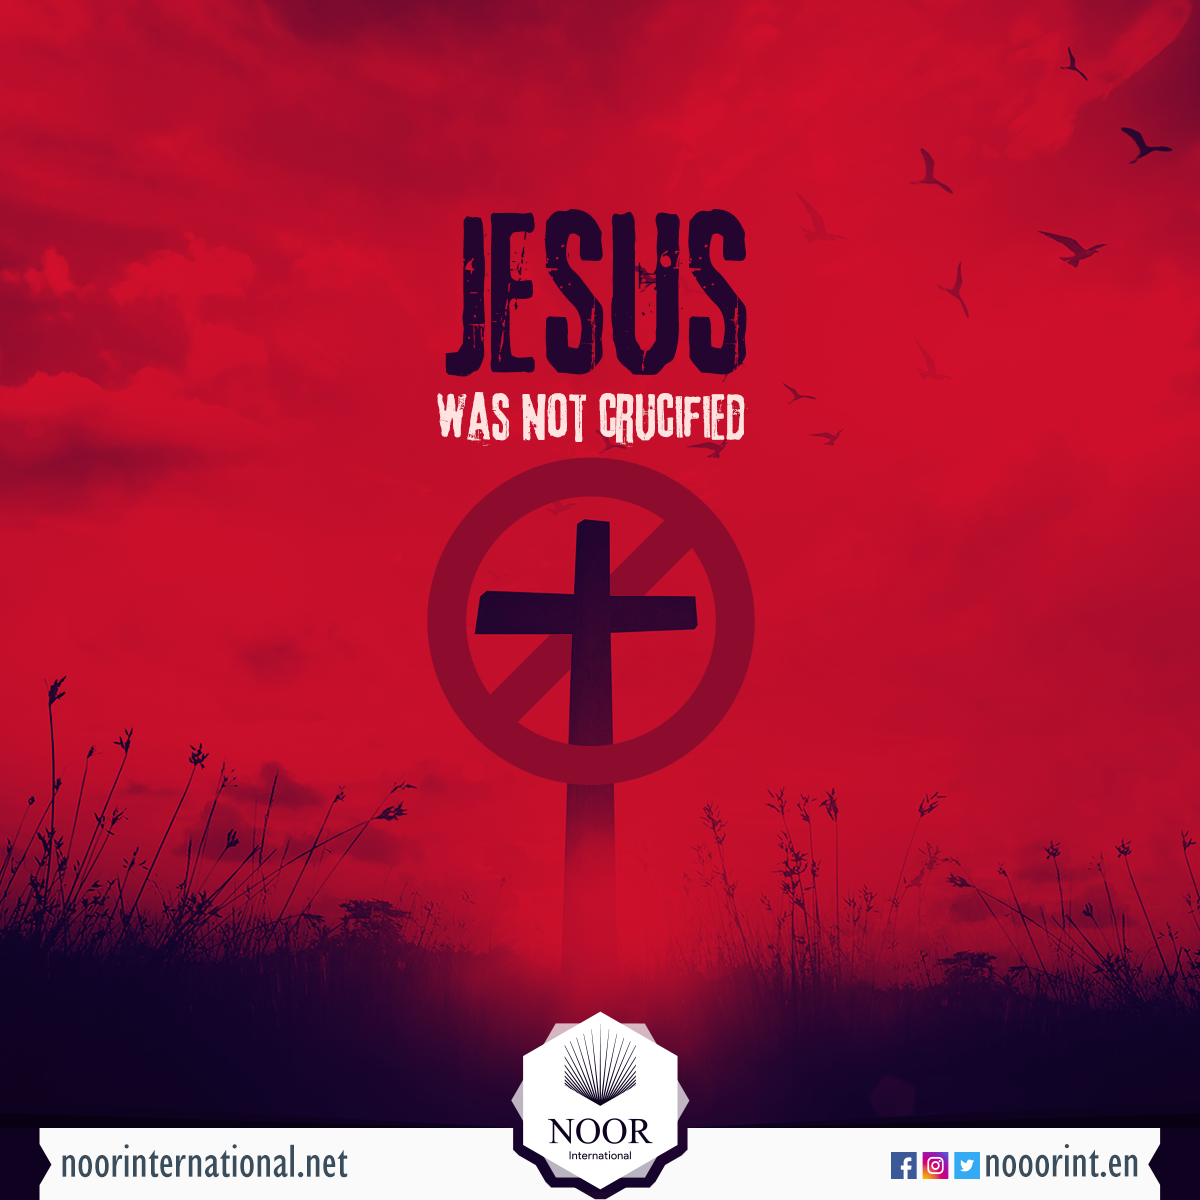 Jesus was not crucified